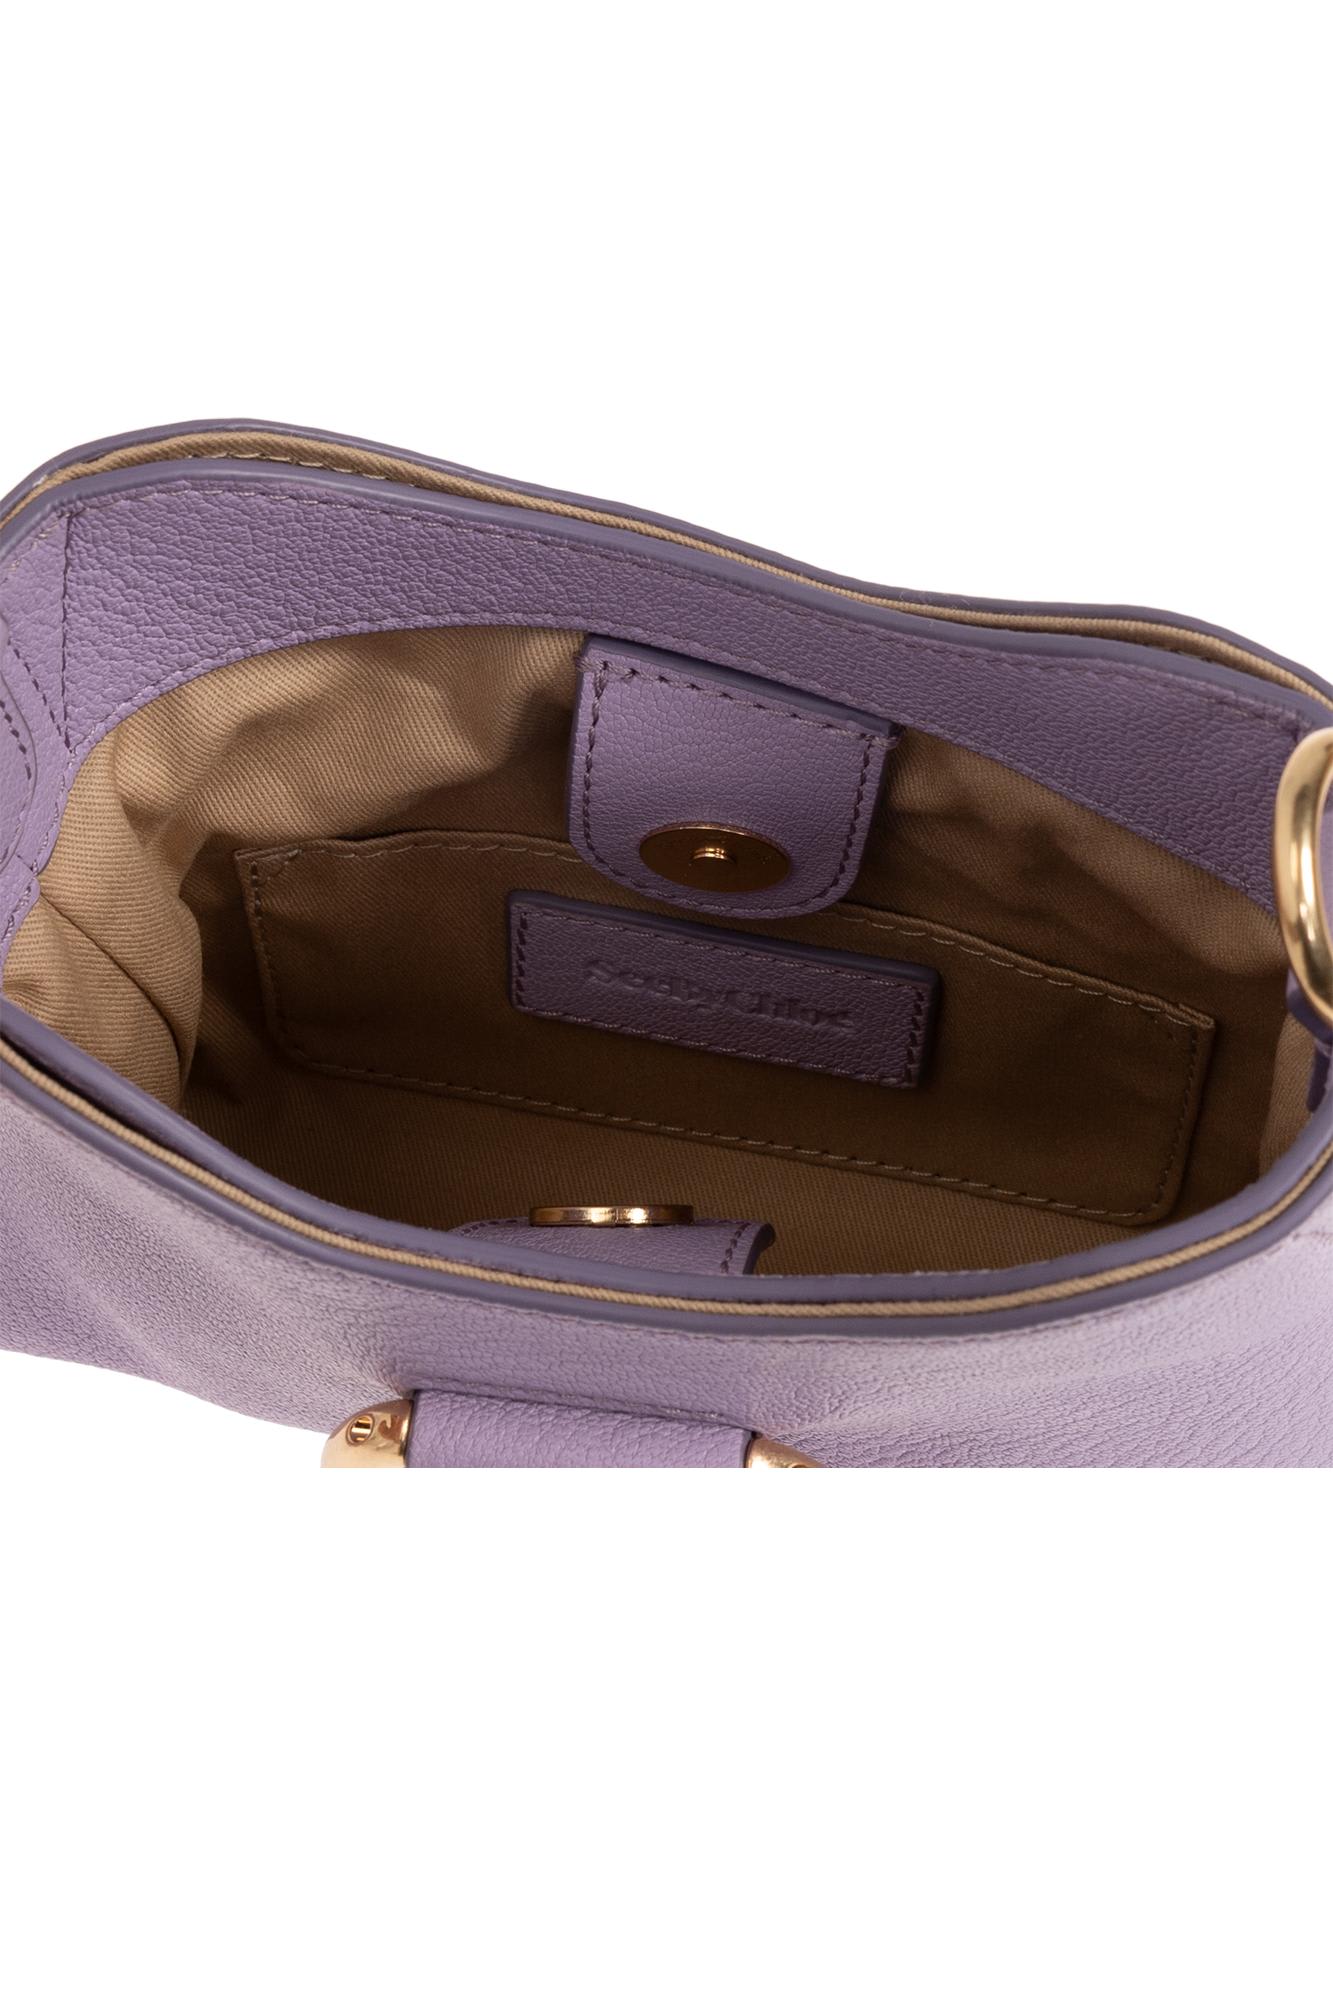 Shop See By Chloé Mara Small Shoulder Bag In Lilac